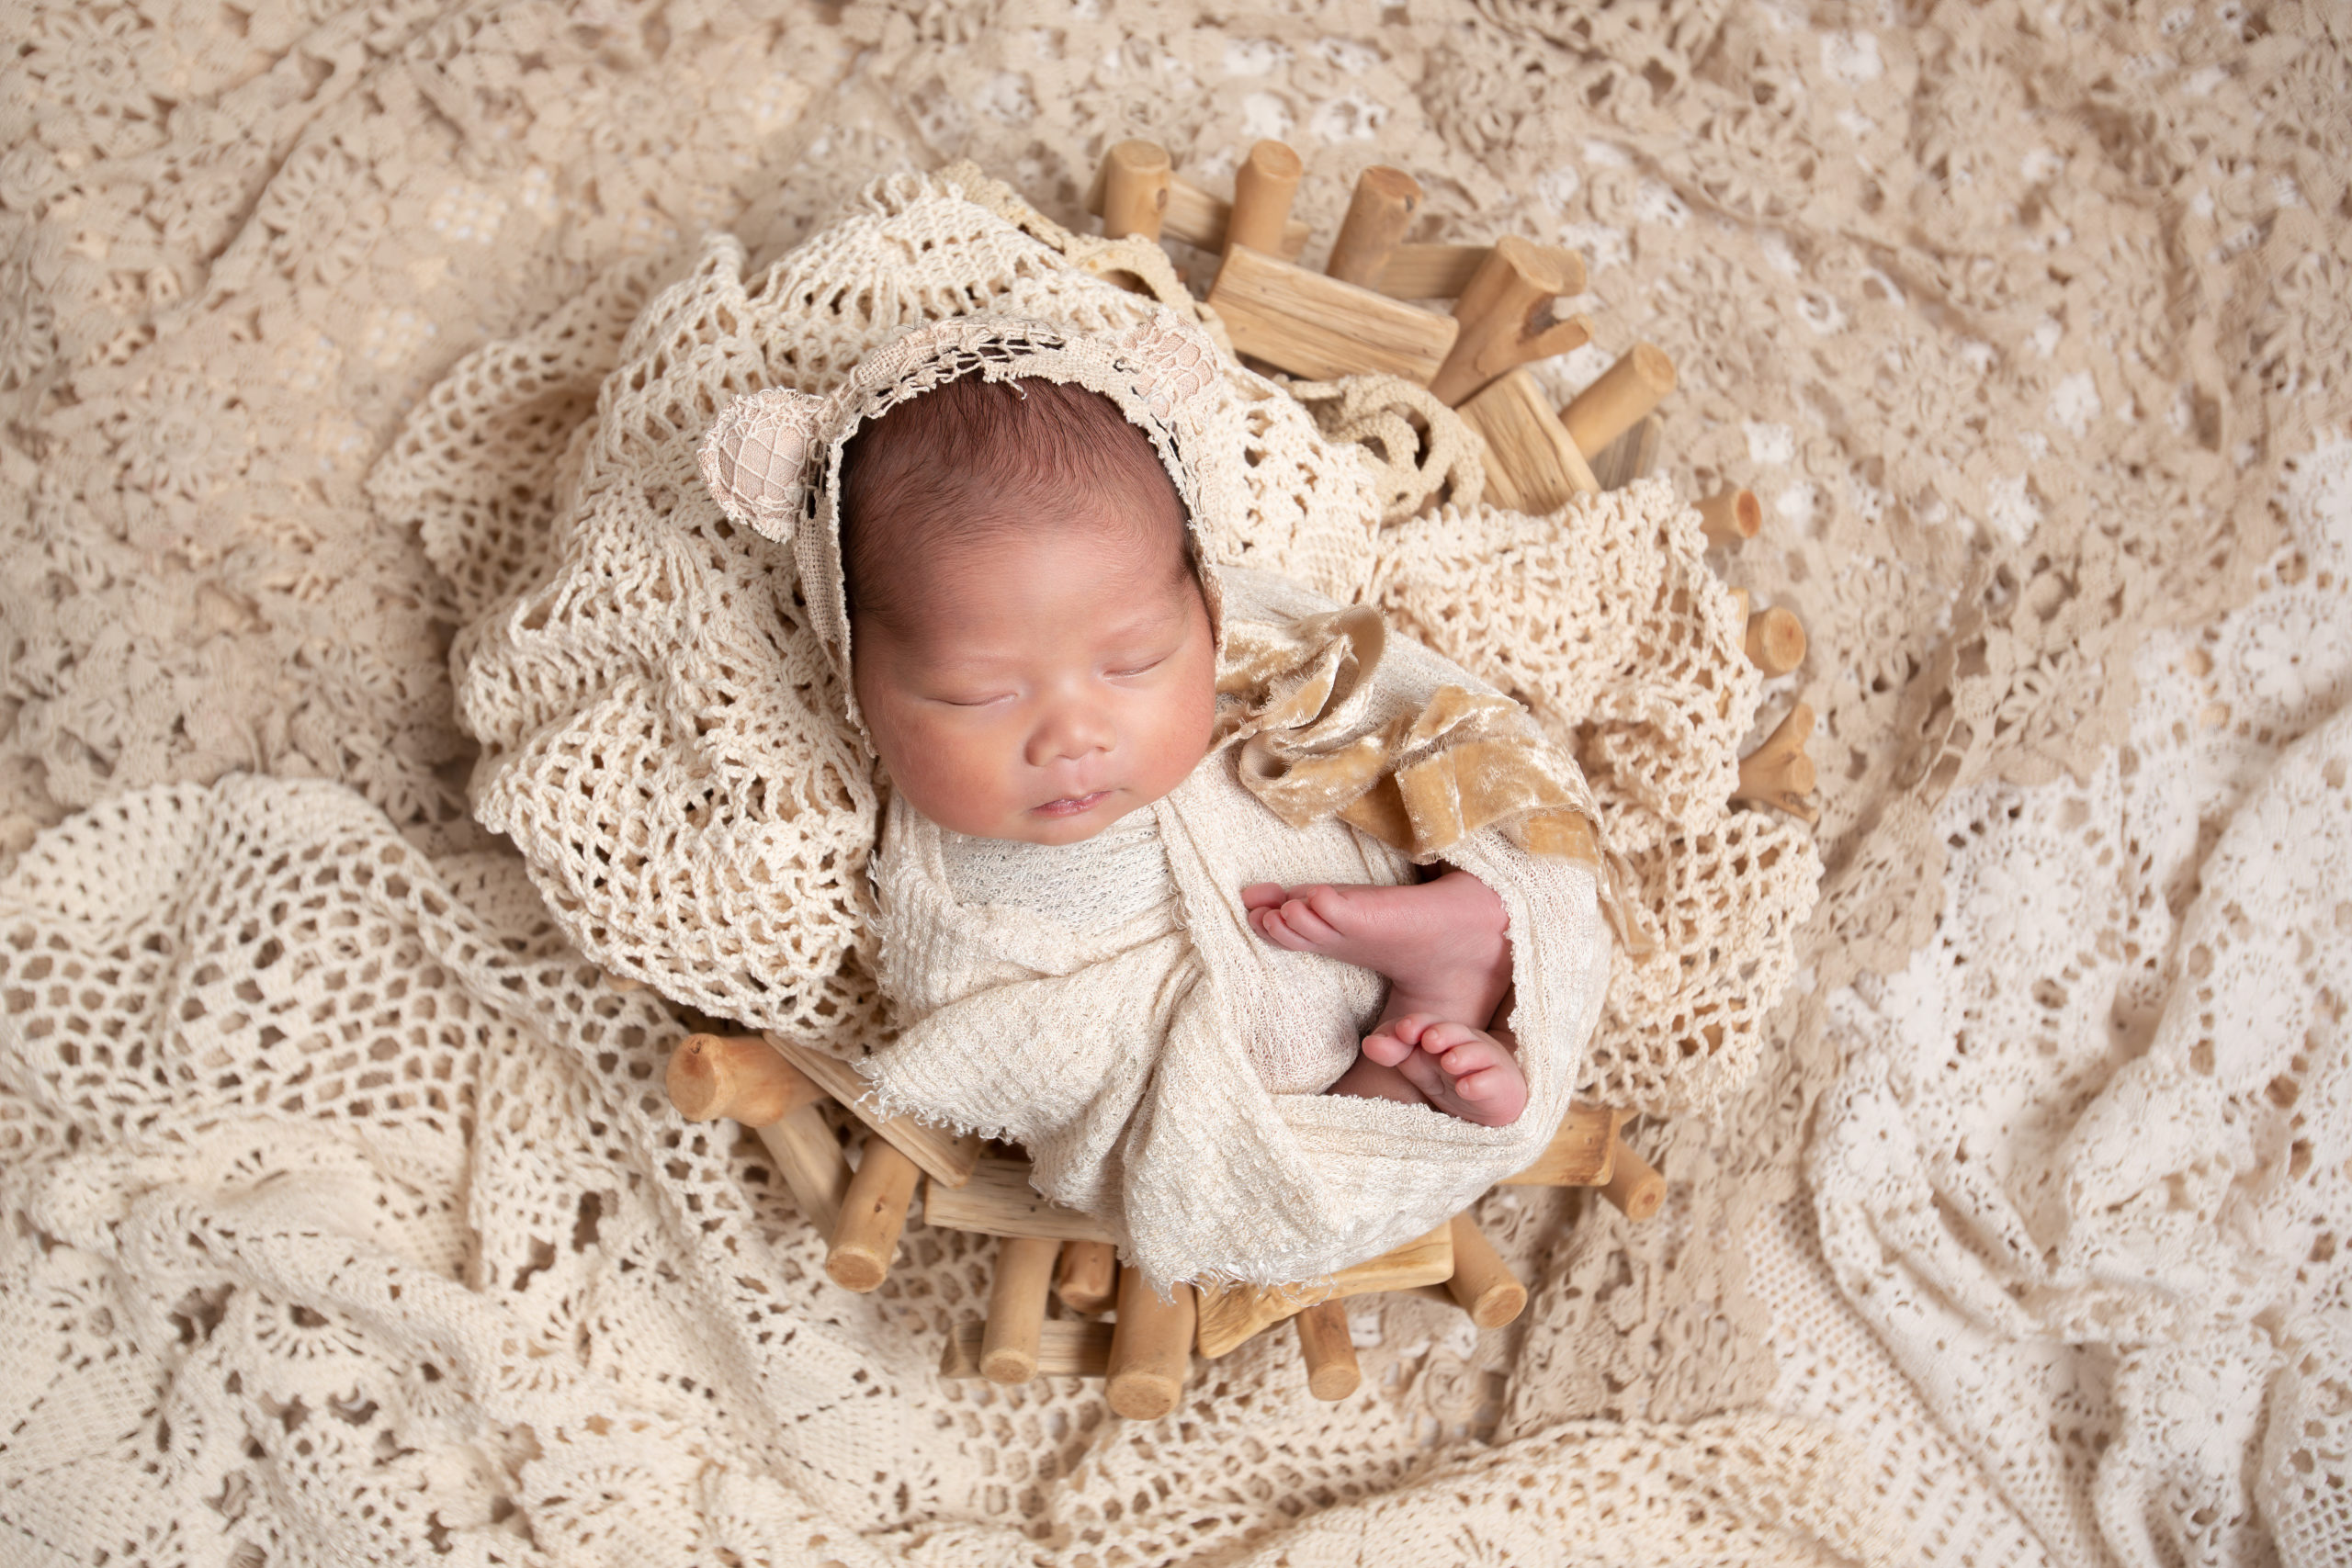 How to Choose the Right Newborn Photographer